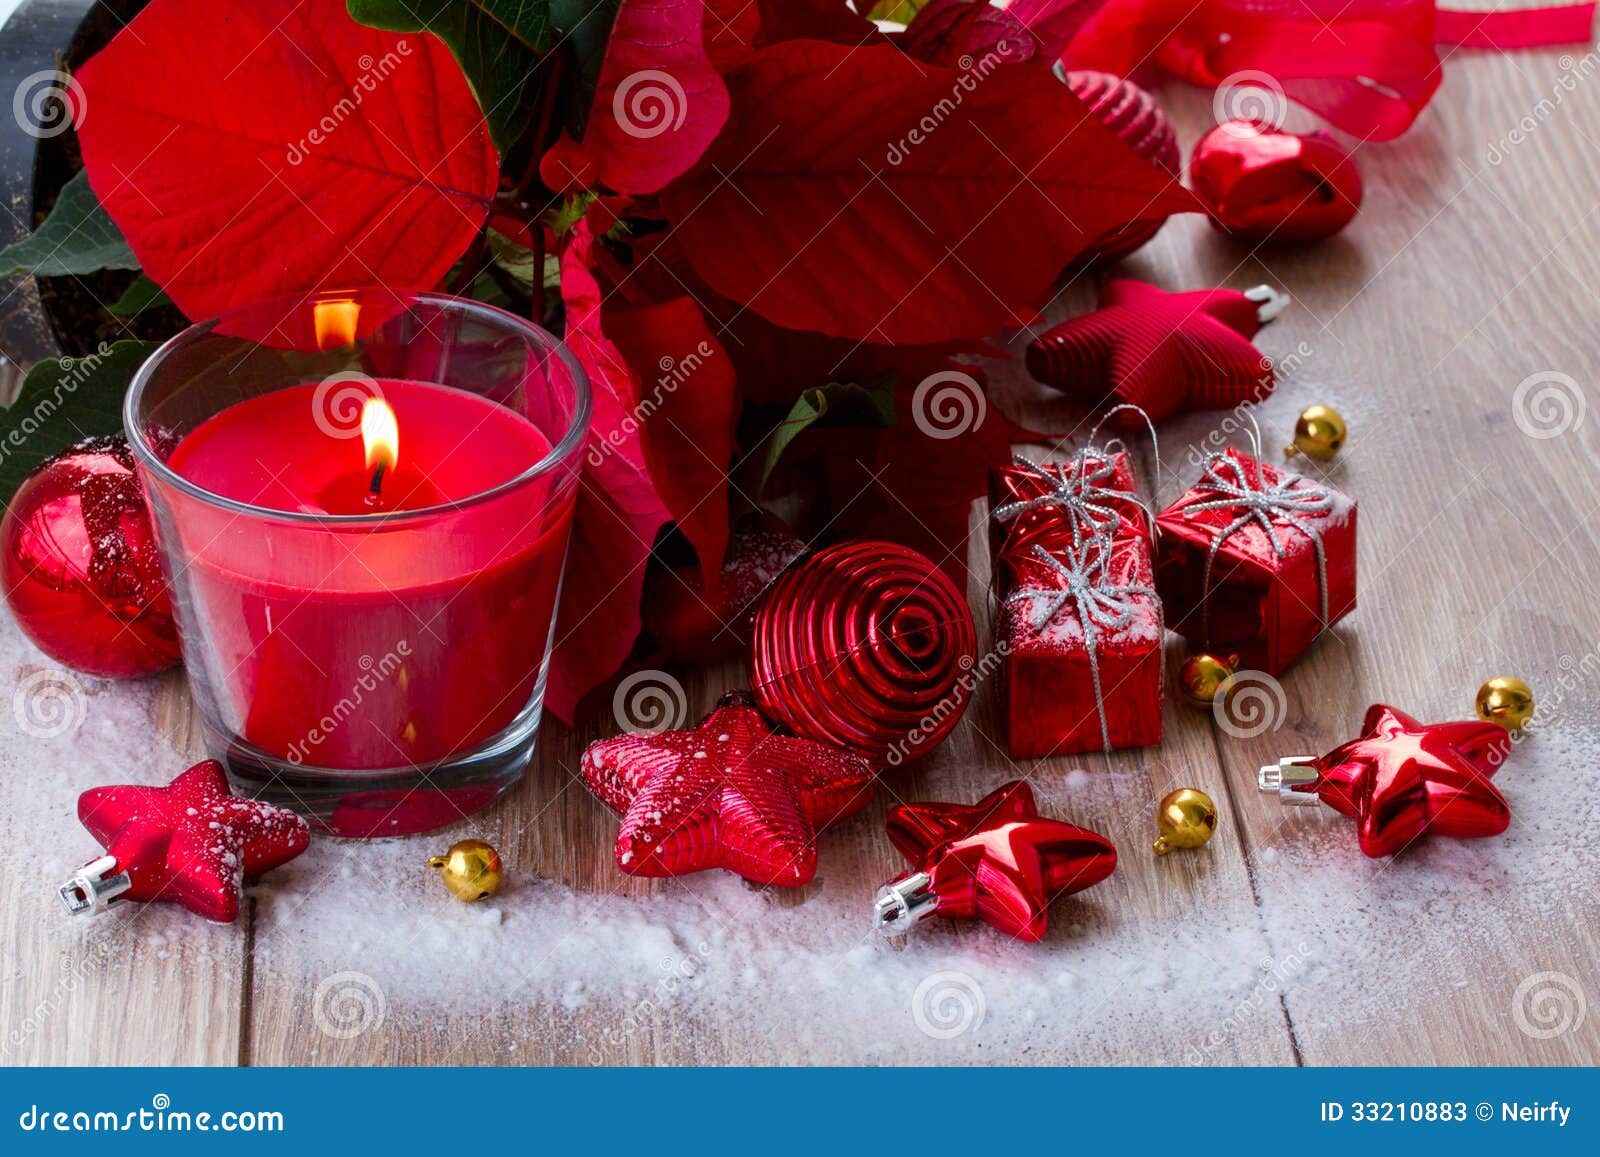 Christmas Red Candle With Decorations Stock Image - Image 